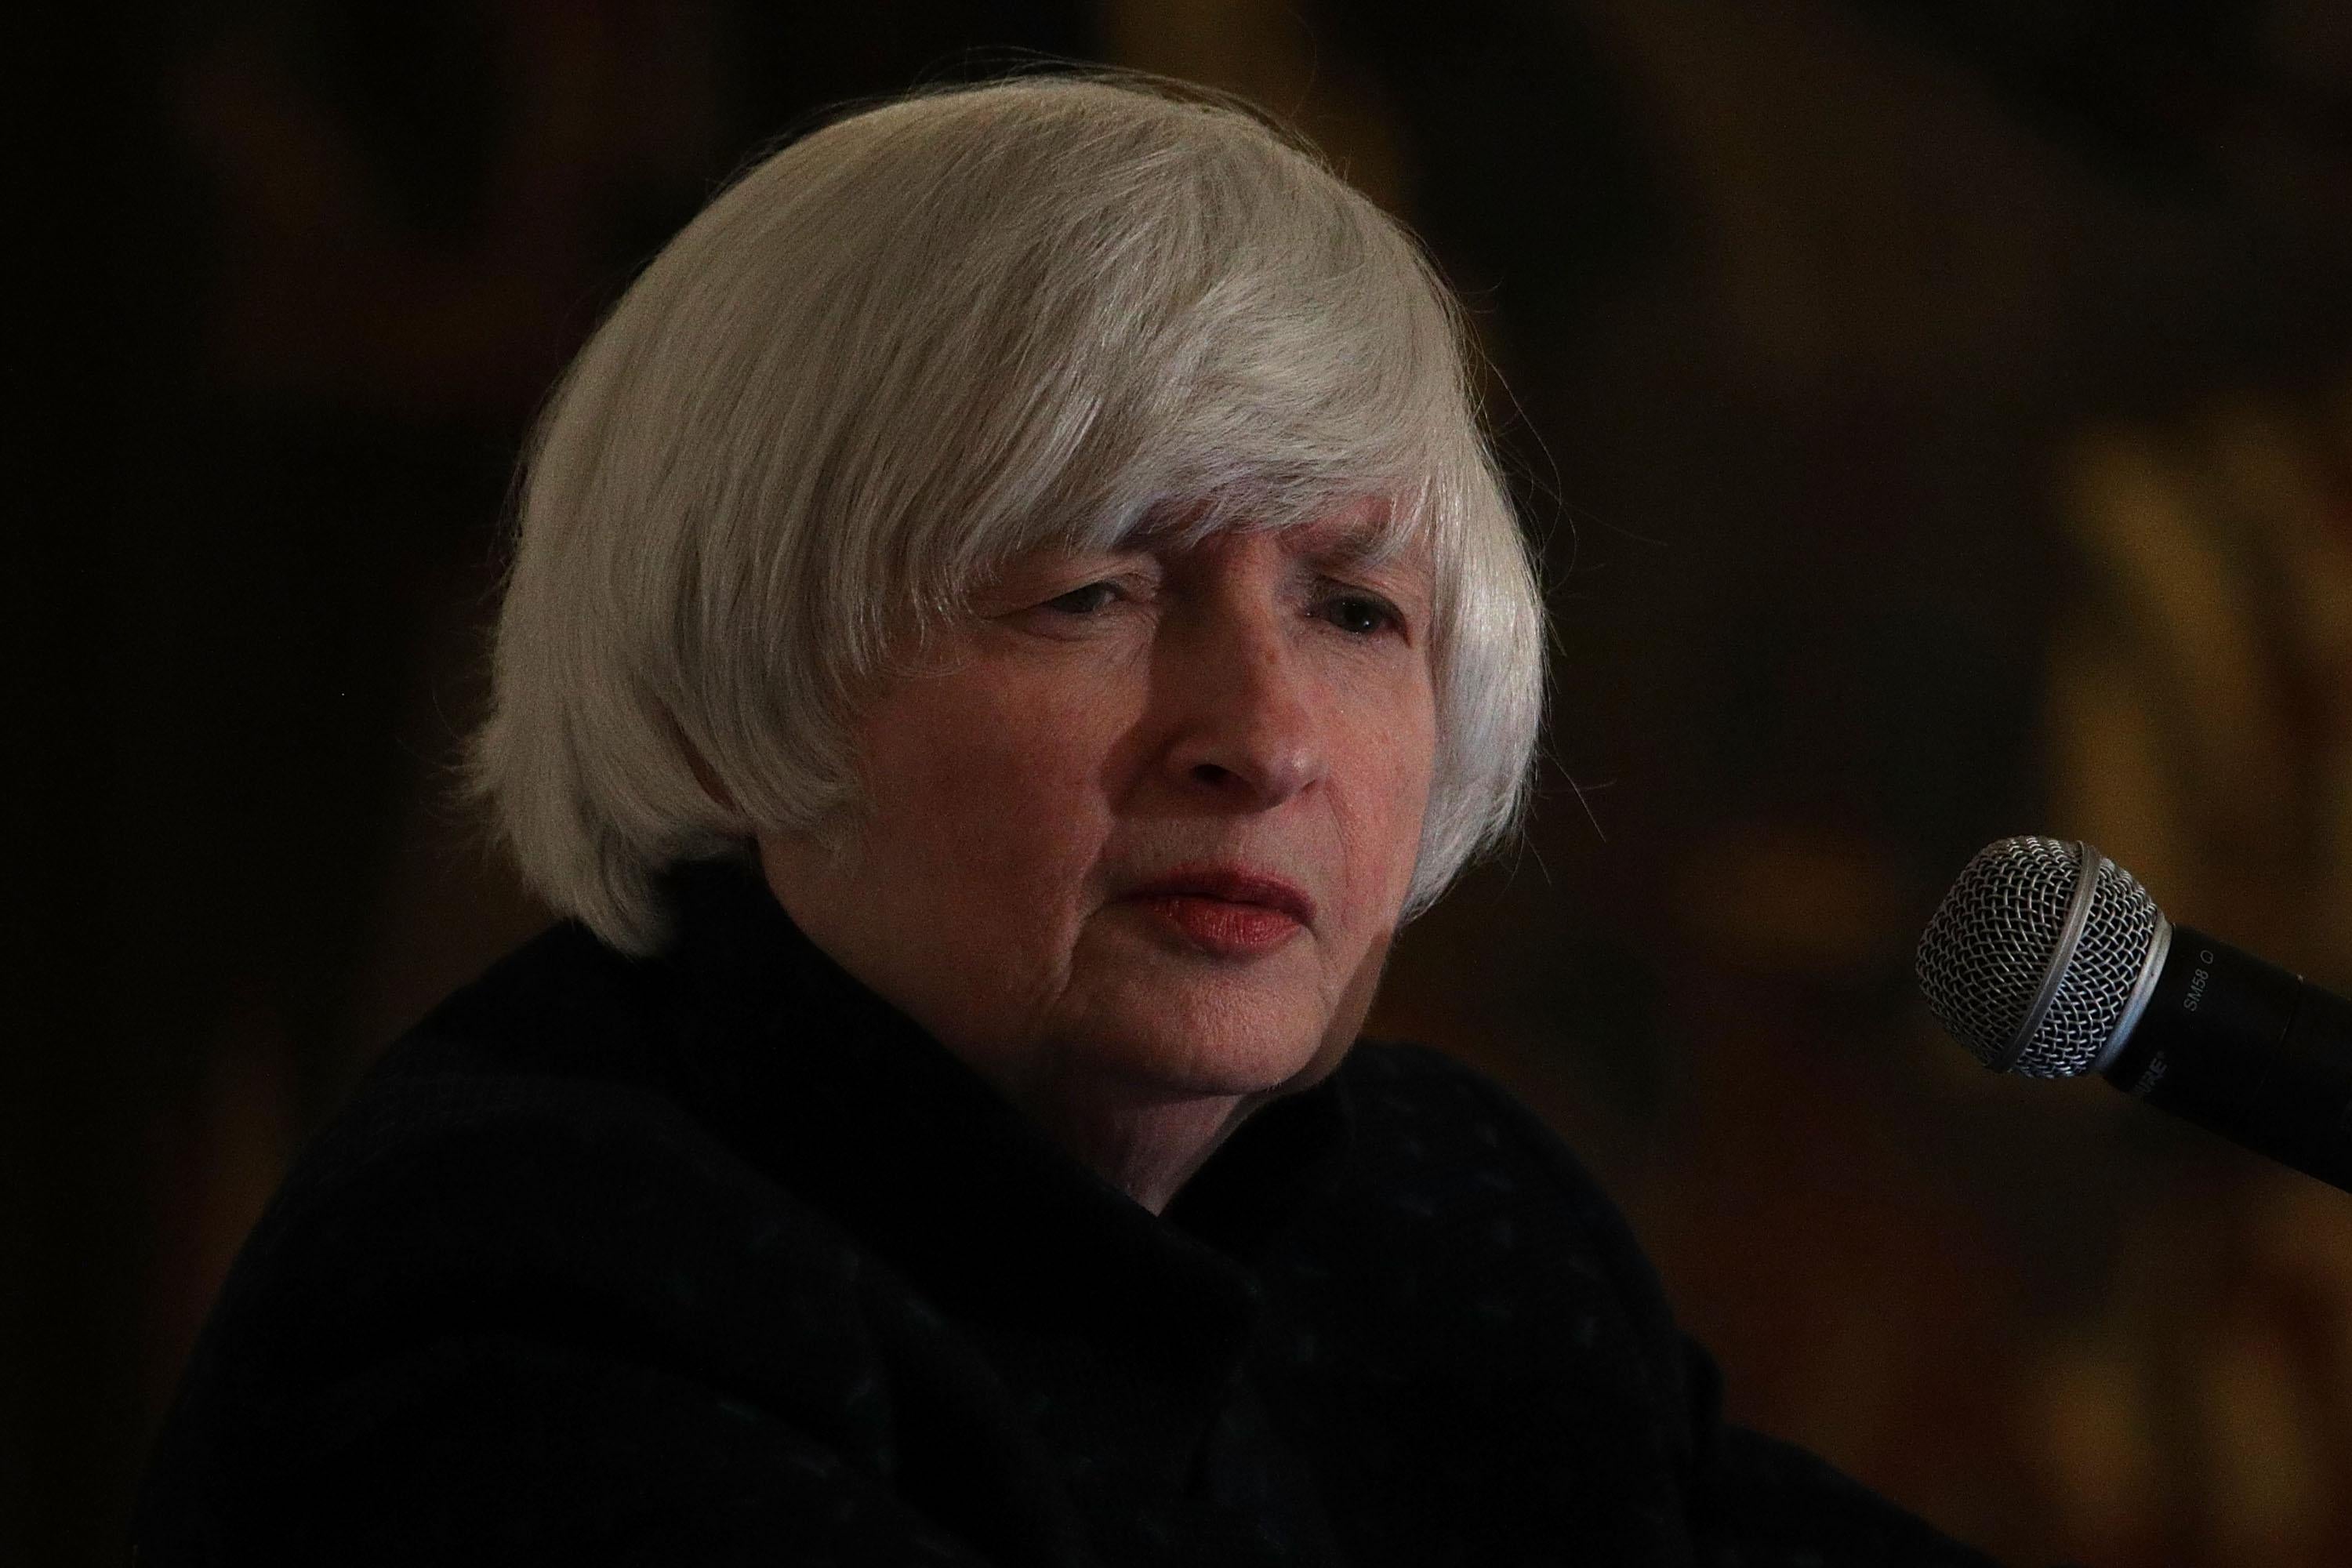 WASHINGTON, DC - OCTOBER 20:  Federal Reserve Chair Janet Yellen listens to a question during an annual dinner of the National Economists Club at the British Embassy October 20, 2017 in Washington, DC. Yellen gave a lecture on 'Monetary Policy Since the Financial Crisis.'  (Photo by Alex Wong/Getty Images)